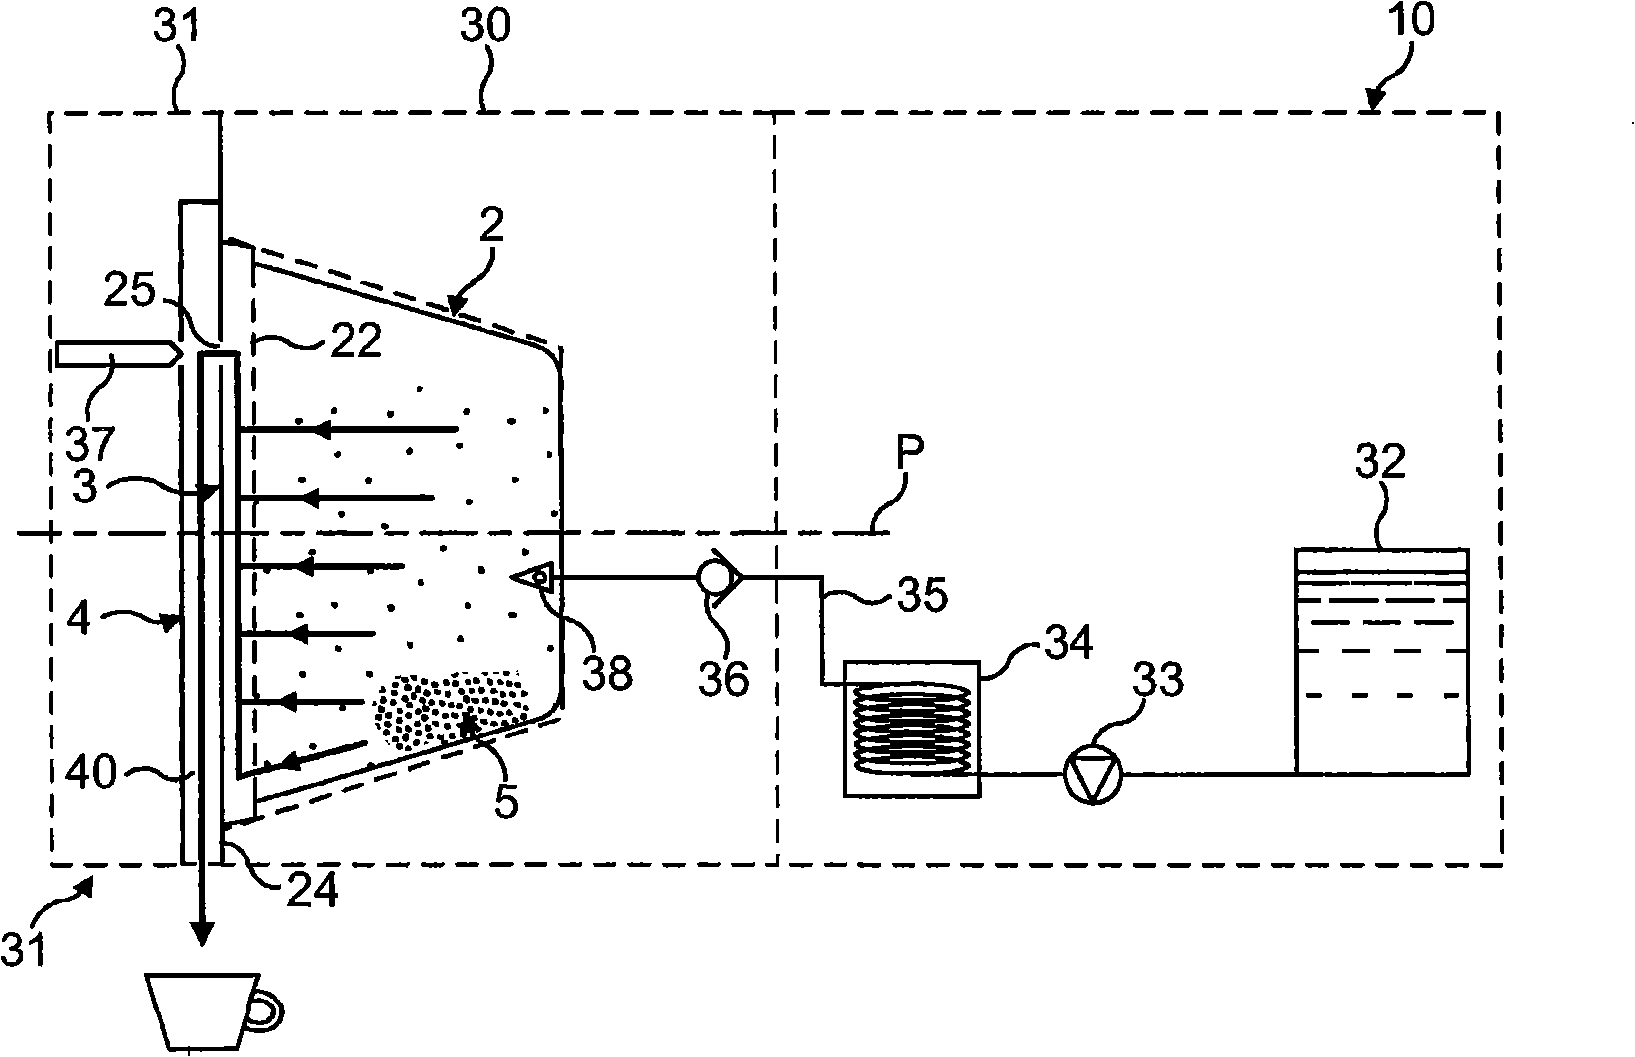 Method for preparing a beverage from a capsule